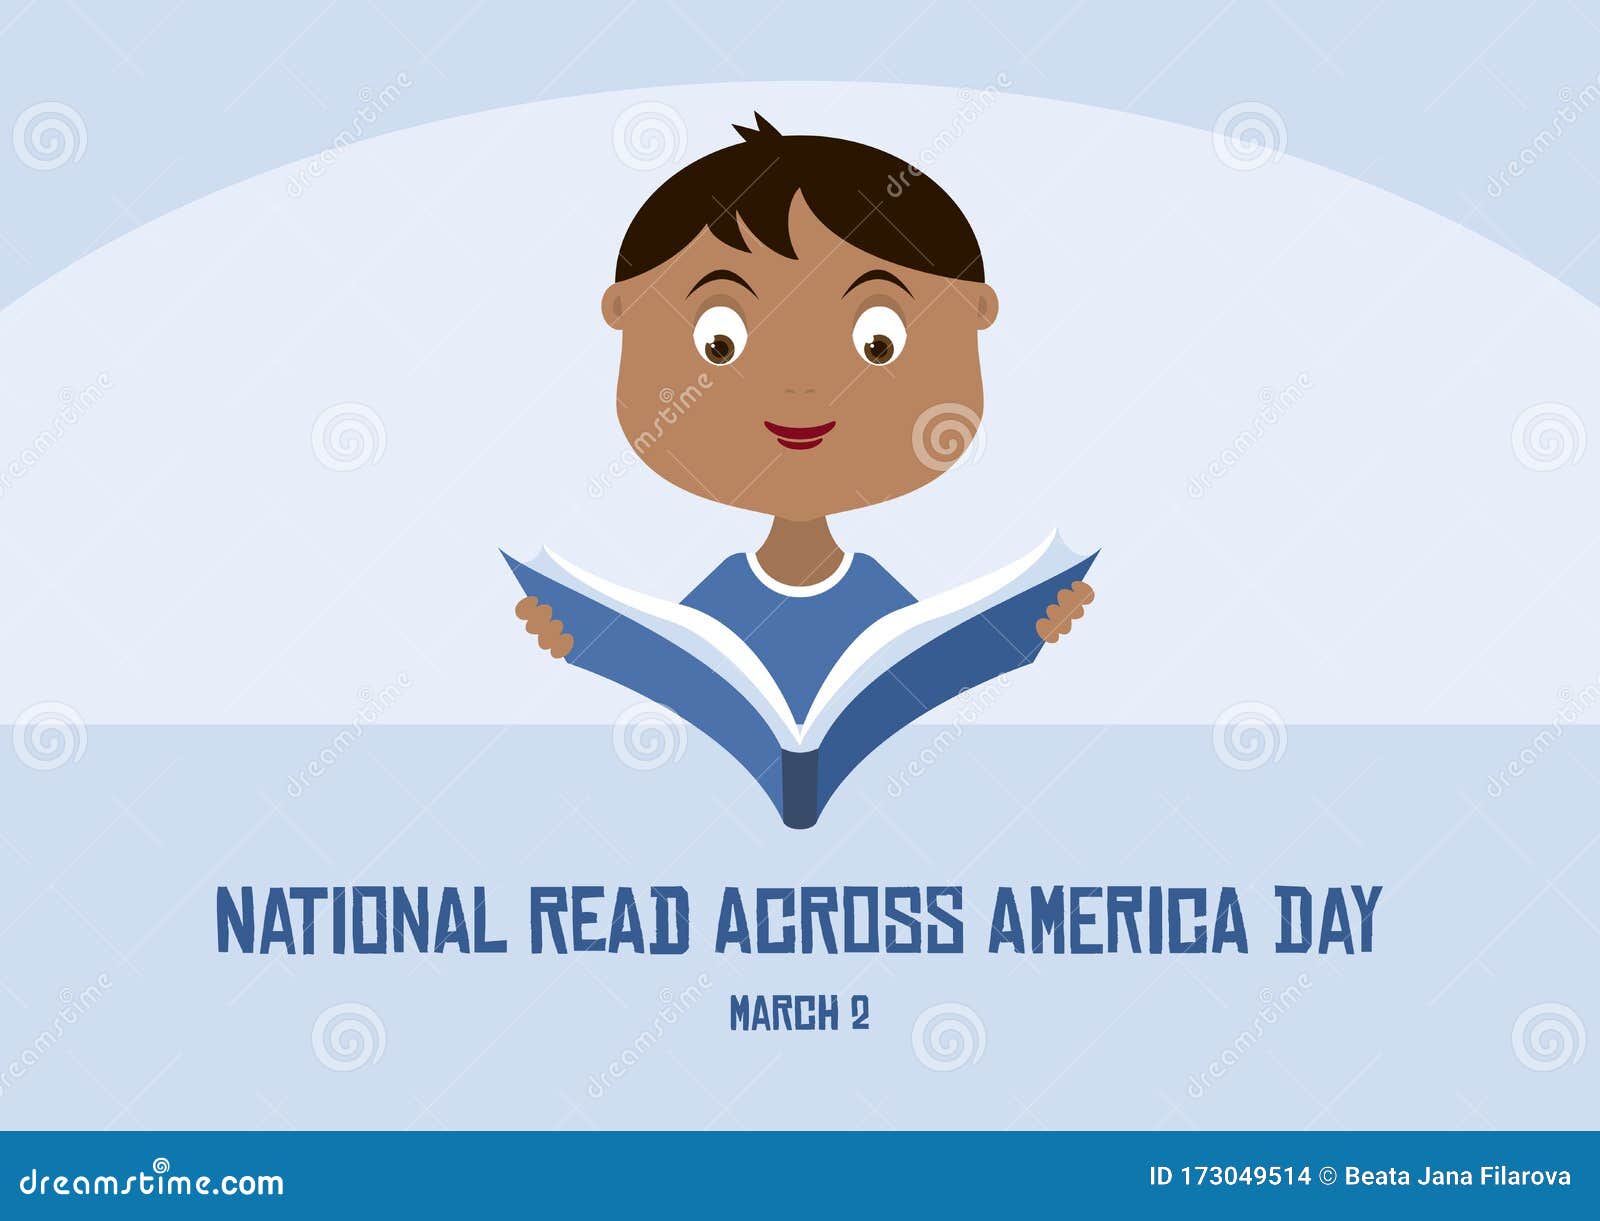 National Read Across America Day Vector Stock Vector Illustration Of